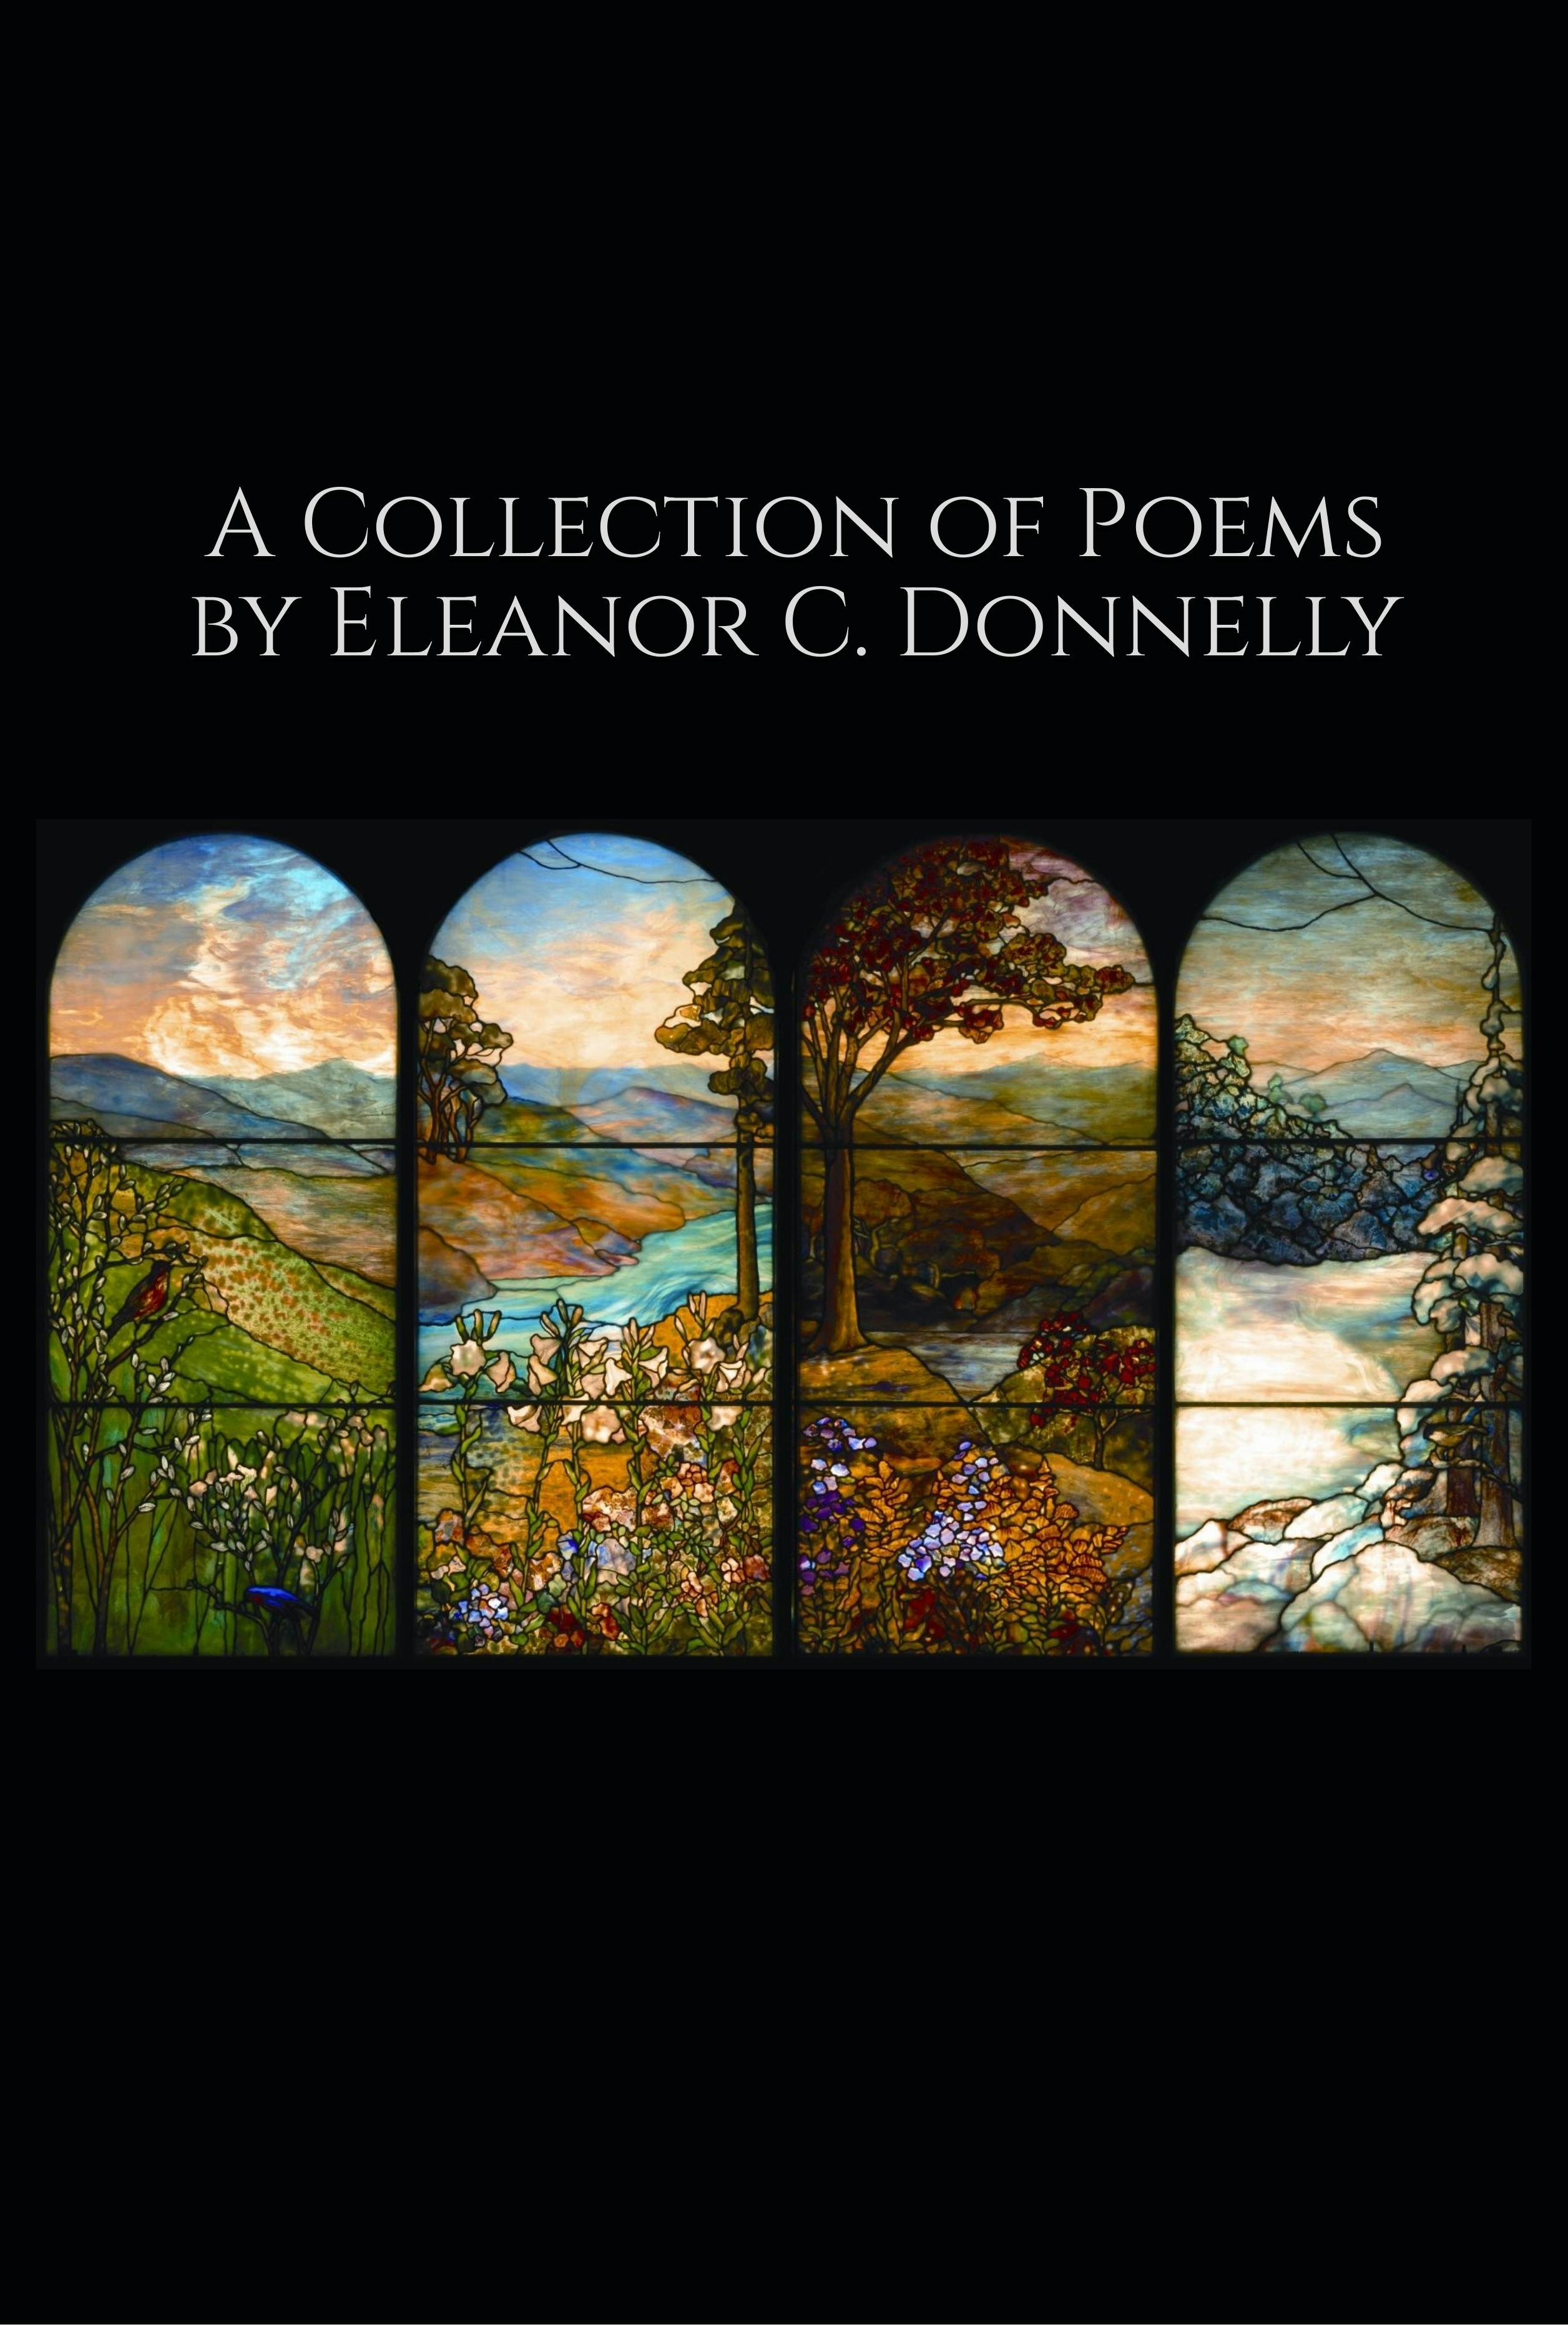 A Collection of Poems by Eleanor C. Donnelly front cover